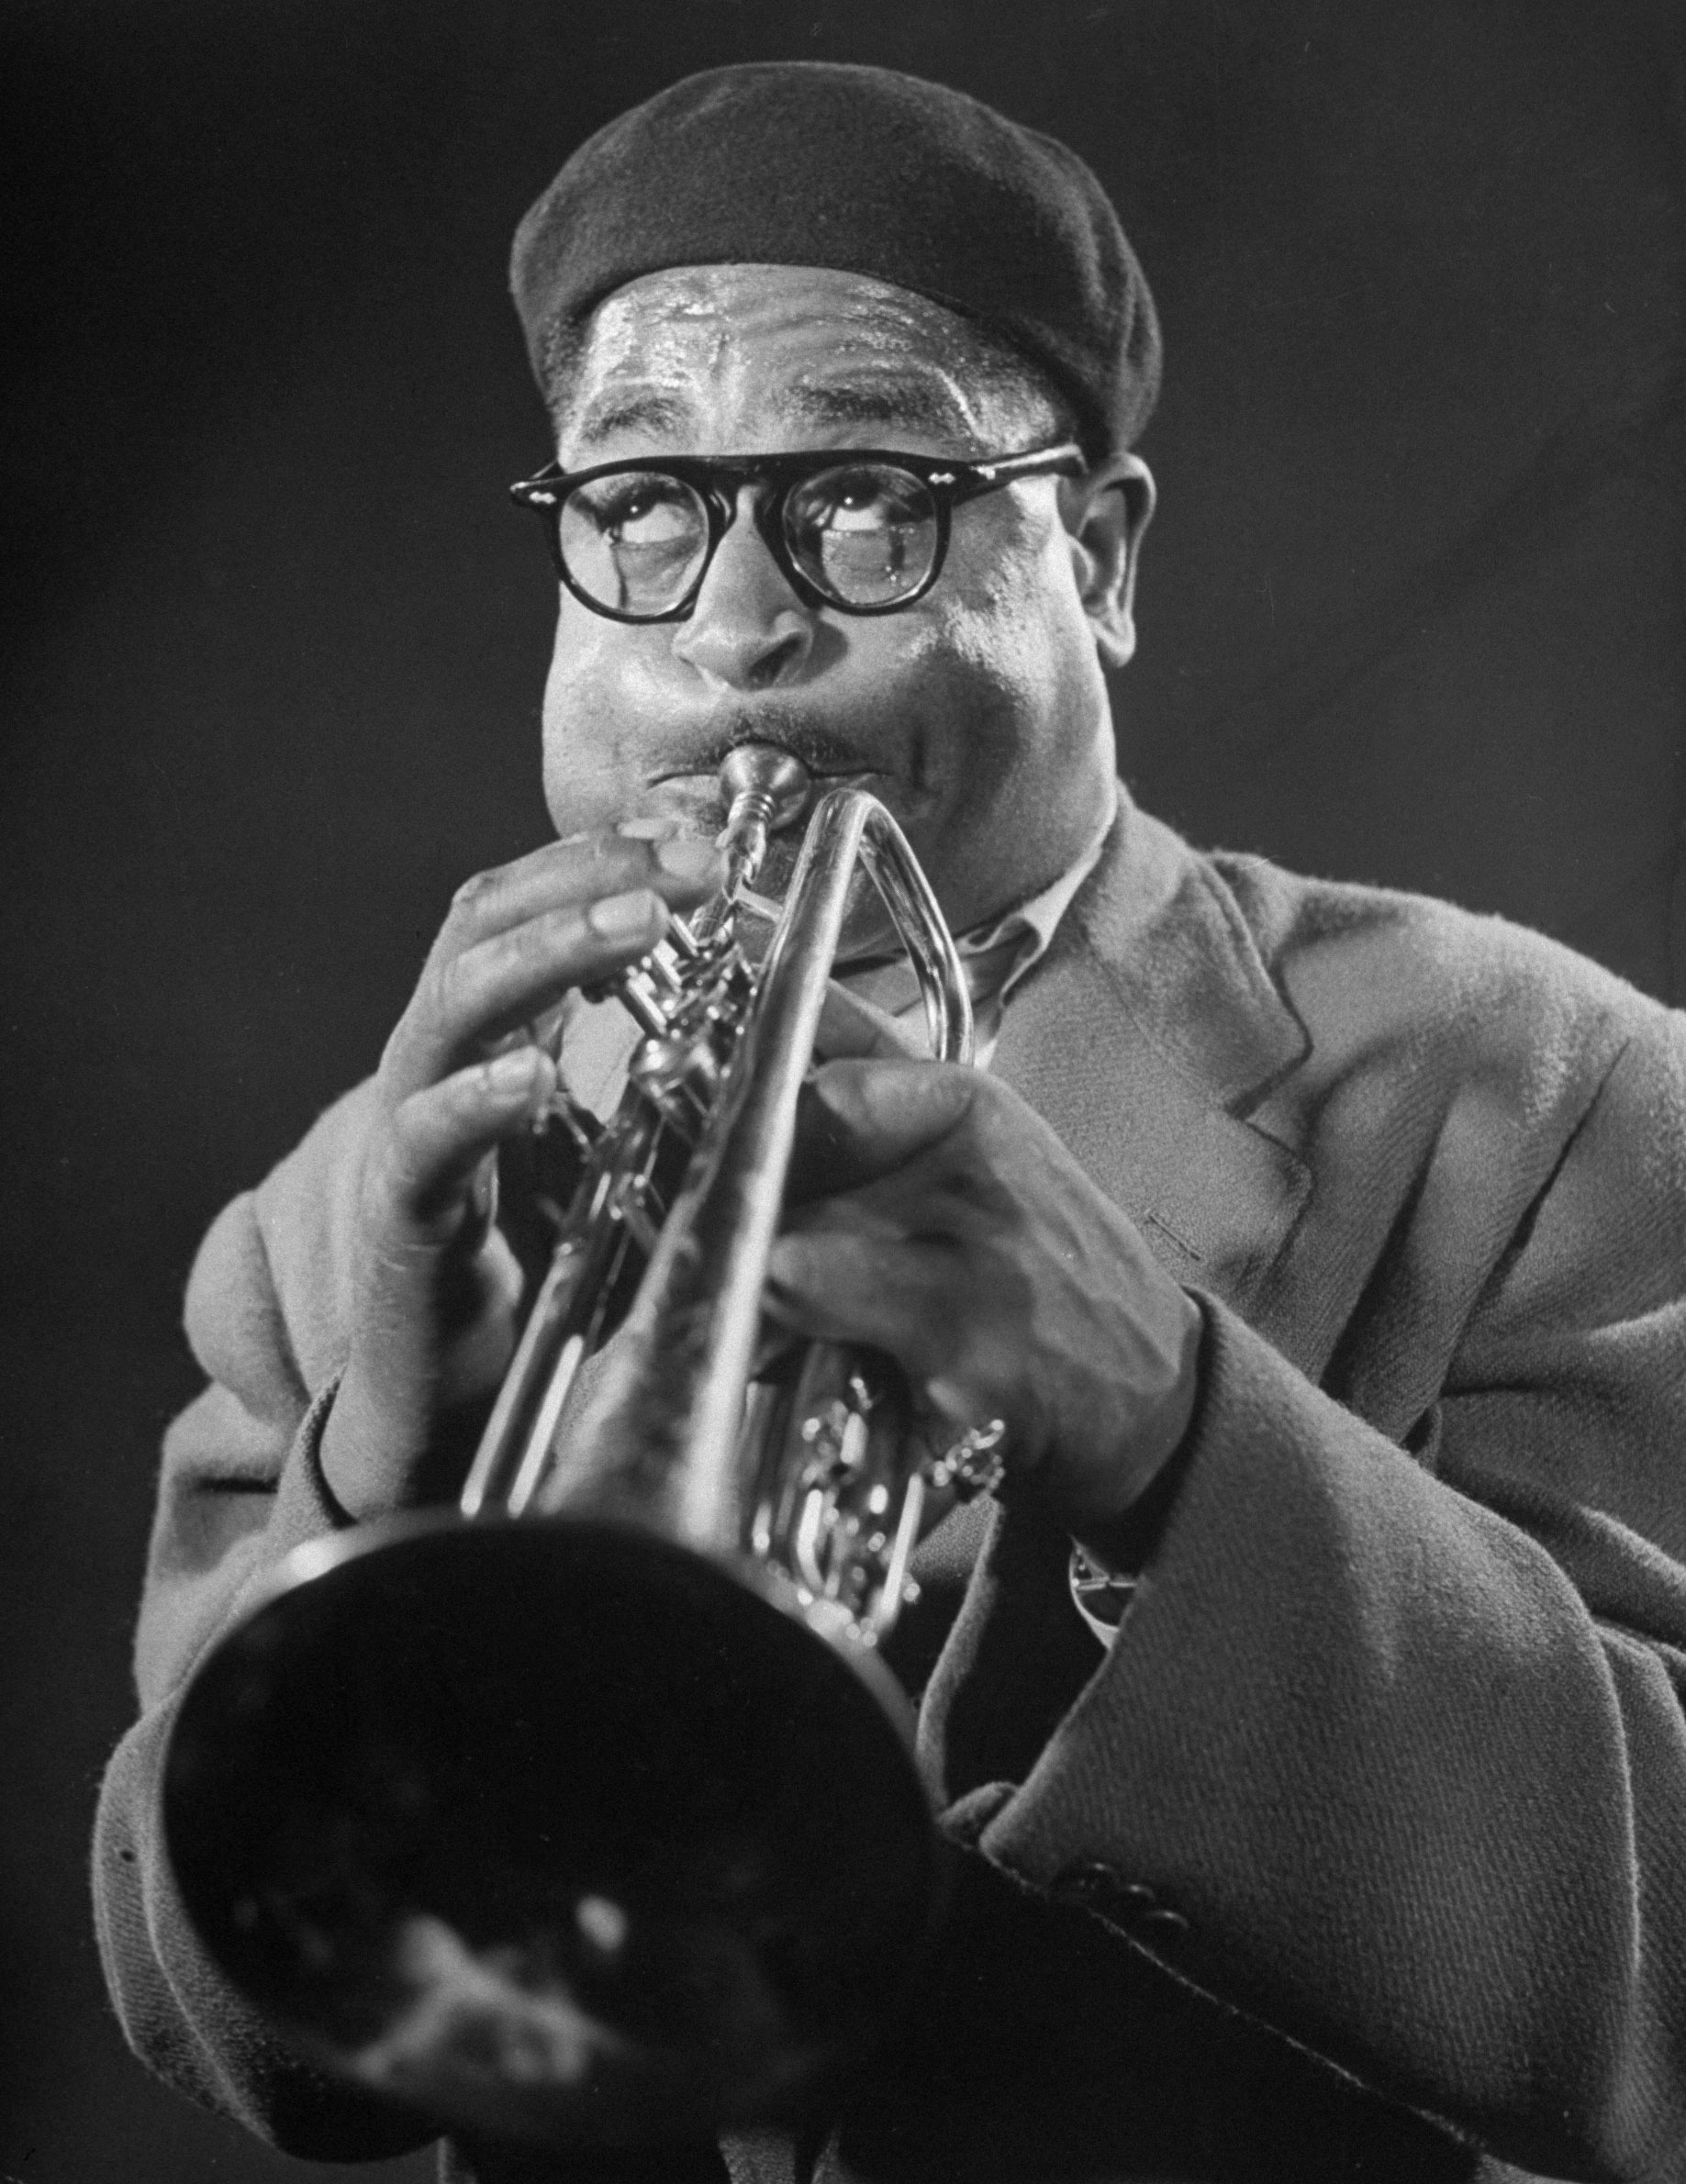 Dizzy Gillespie during a jam session, 1948.